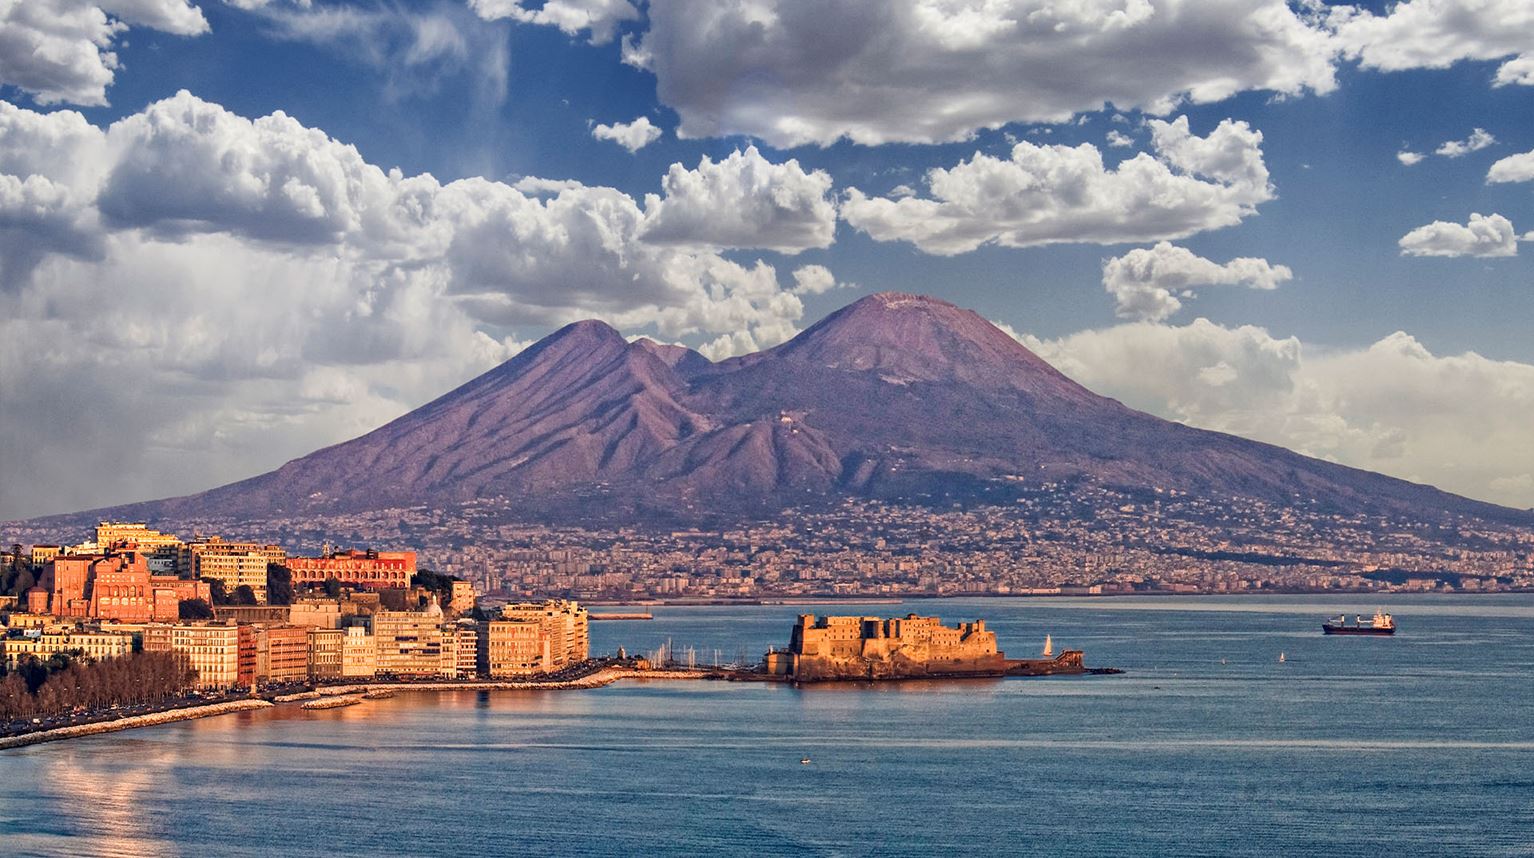 Bay of Naples at sunset with Mount Vesuvius behind. 